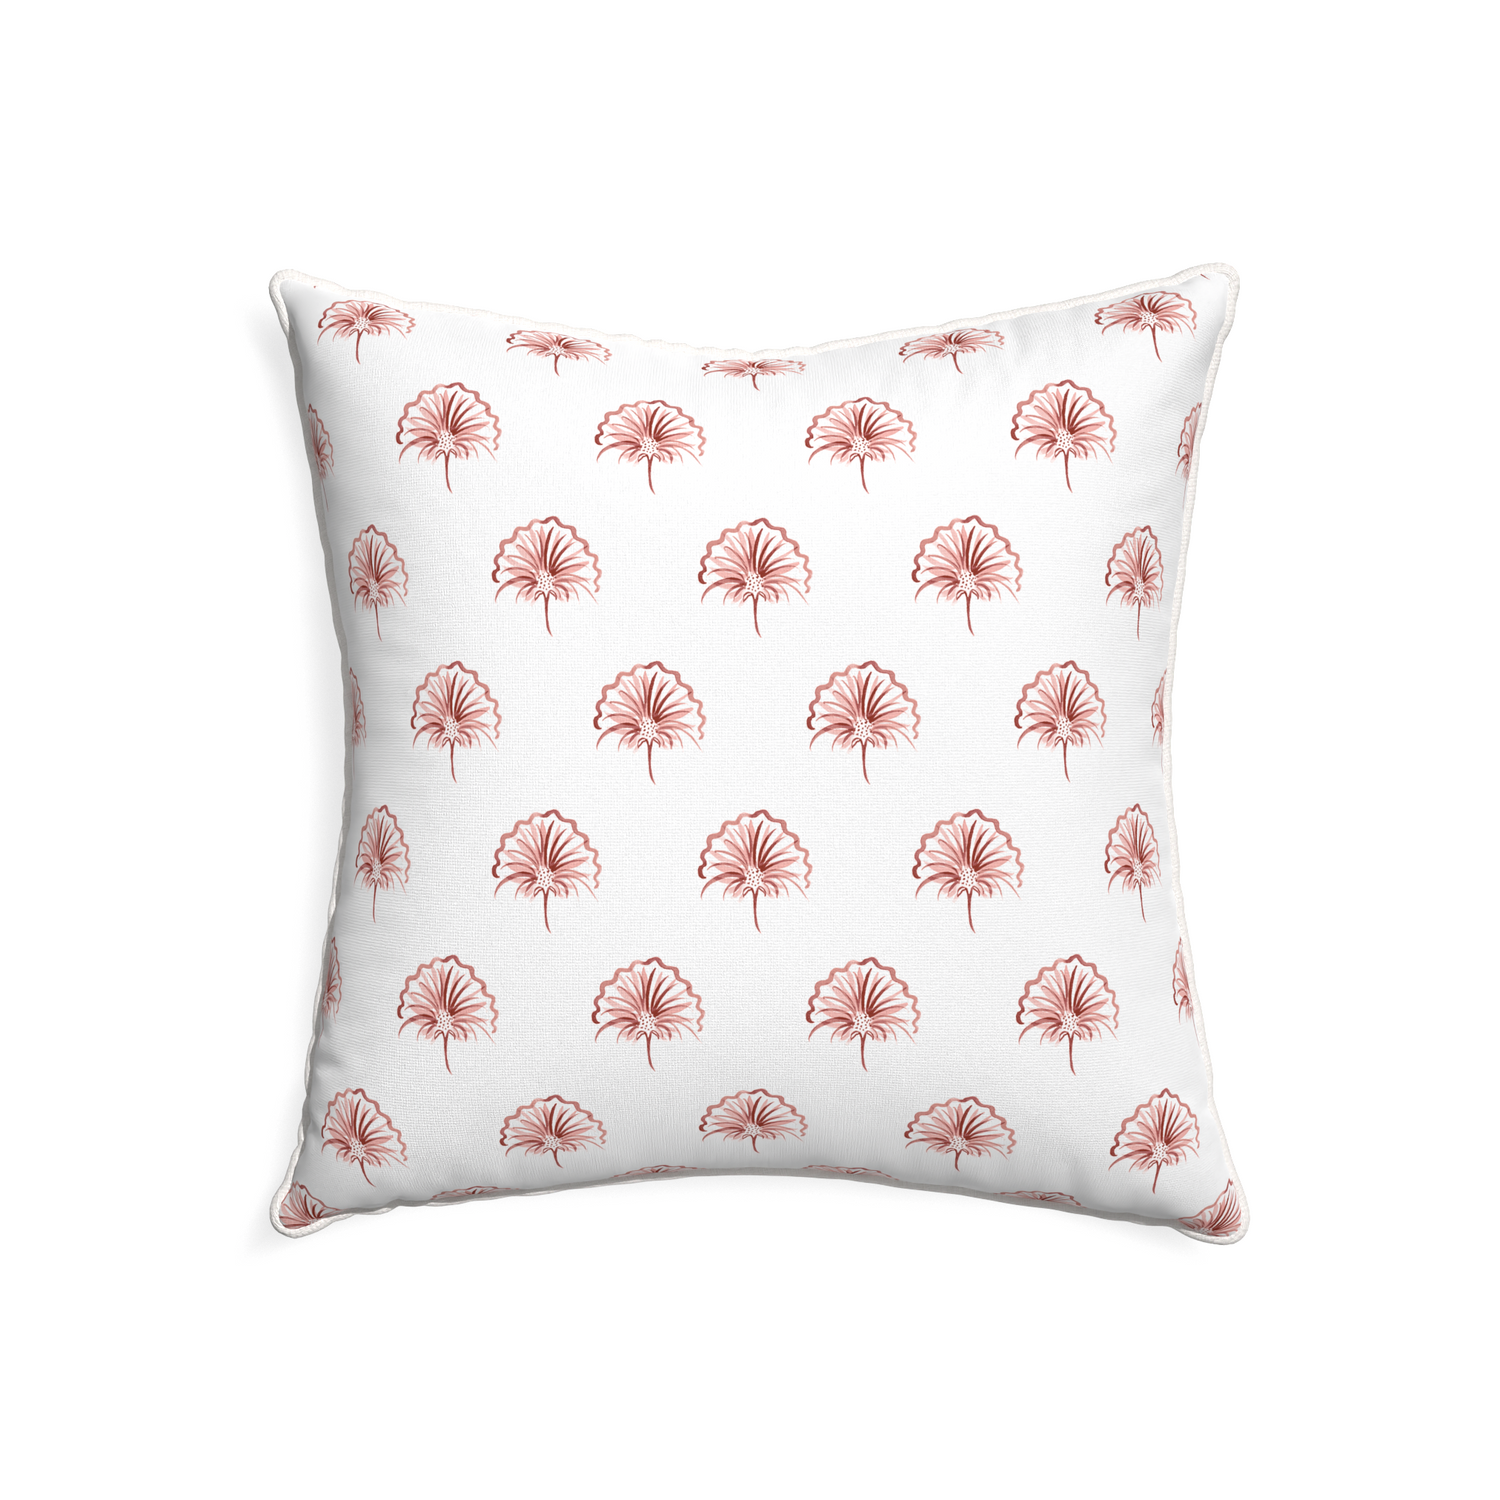 22-square penelope rose custom floral pinkpillow with snow piping on white background